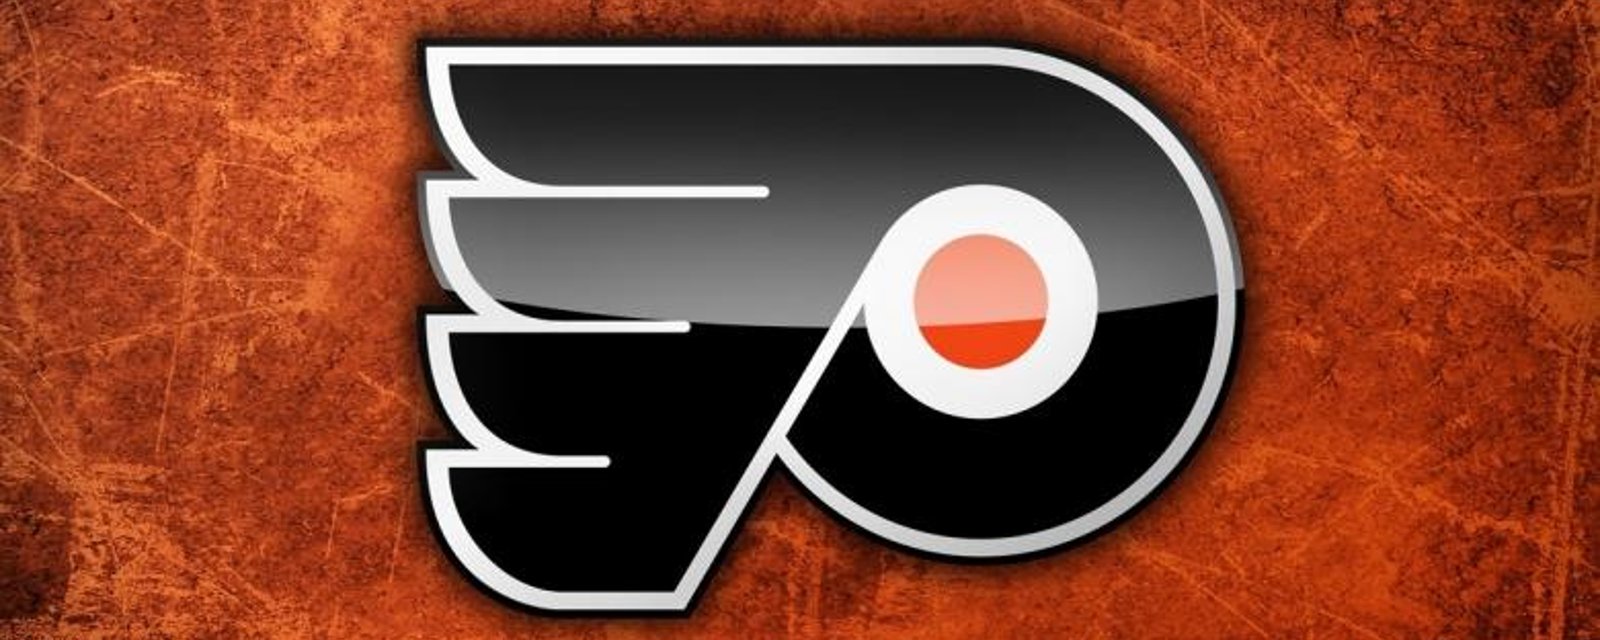 Breaking: The Flyers have re-signed well-rounded forward to contract extension.